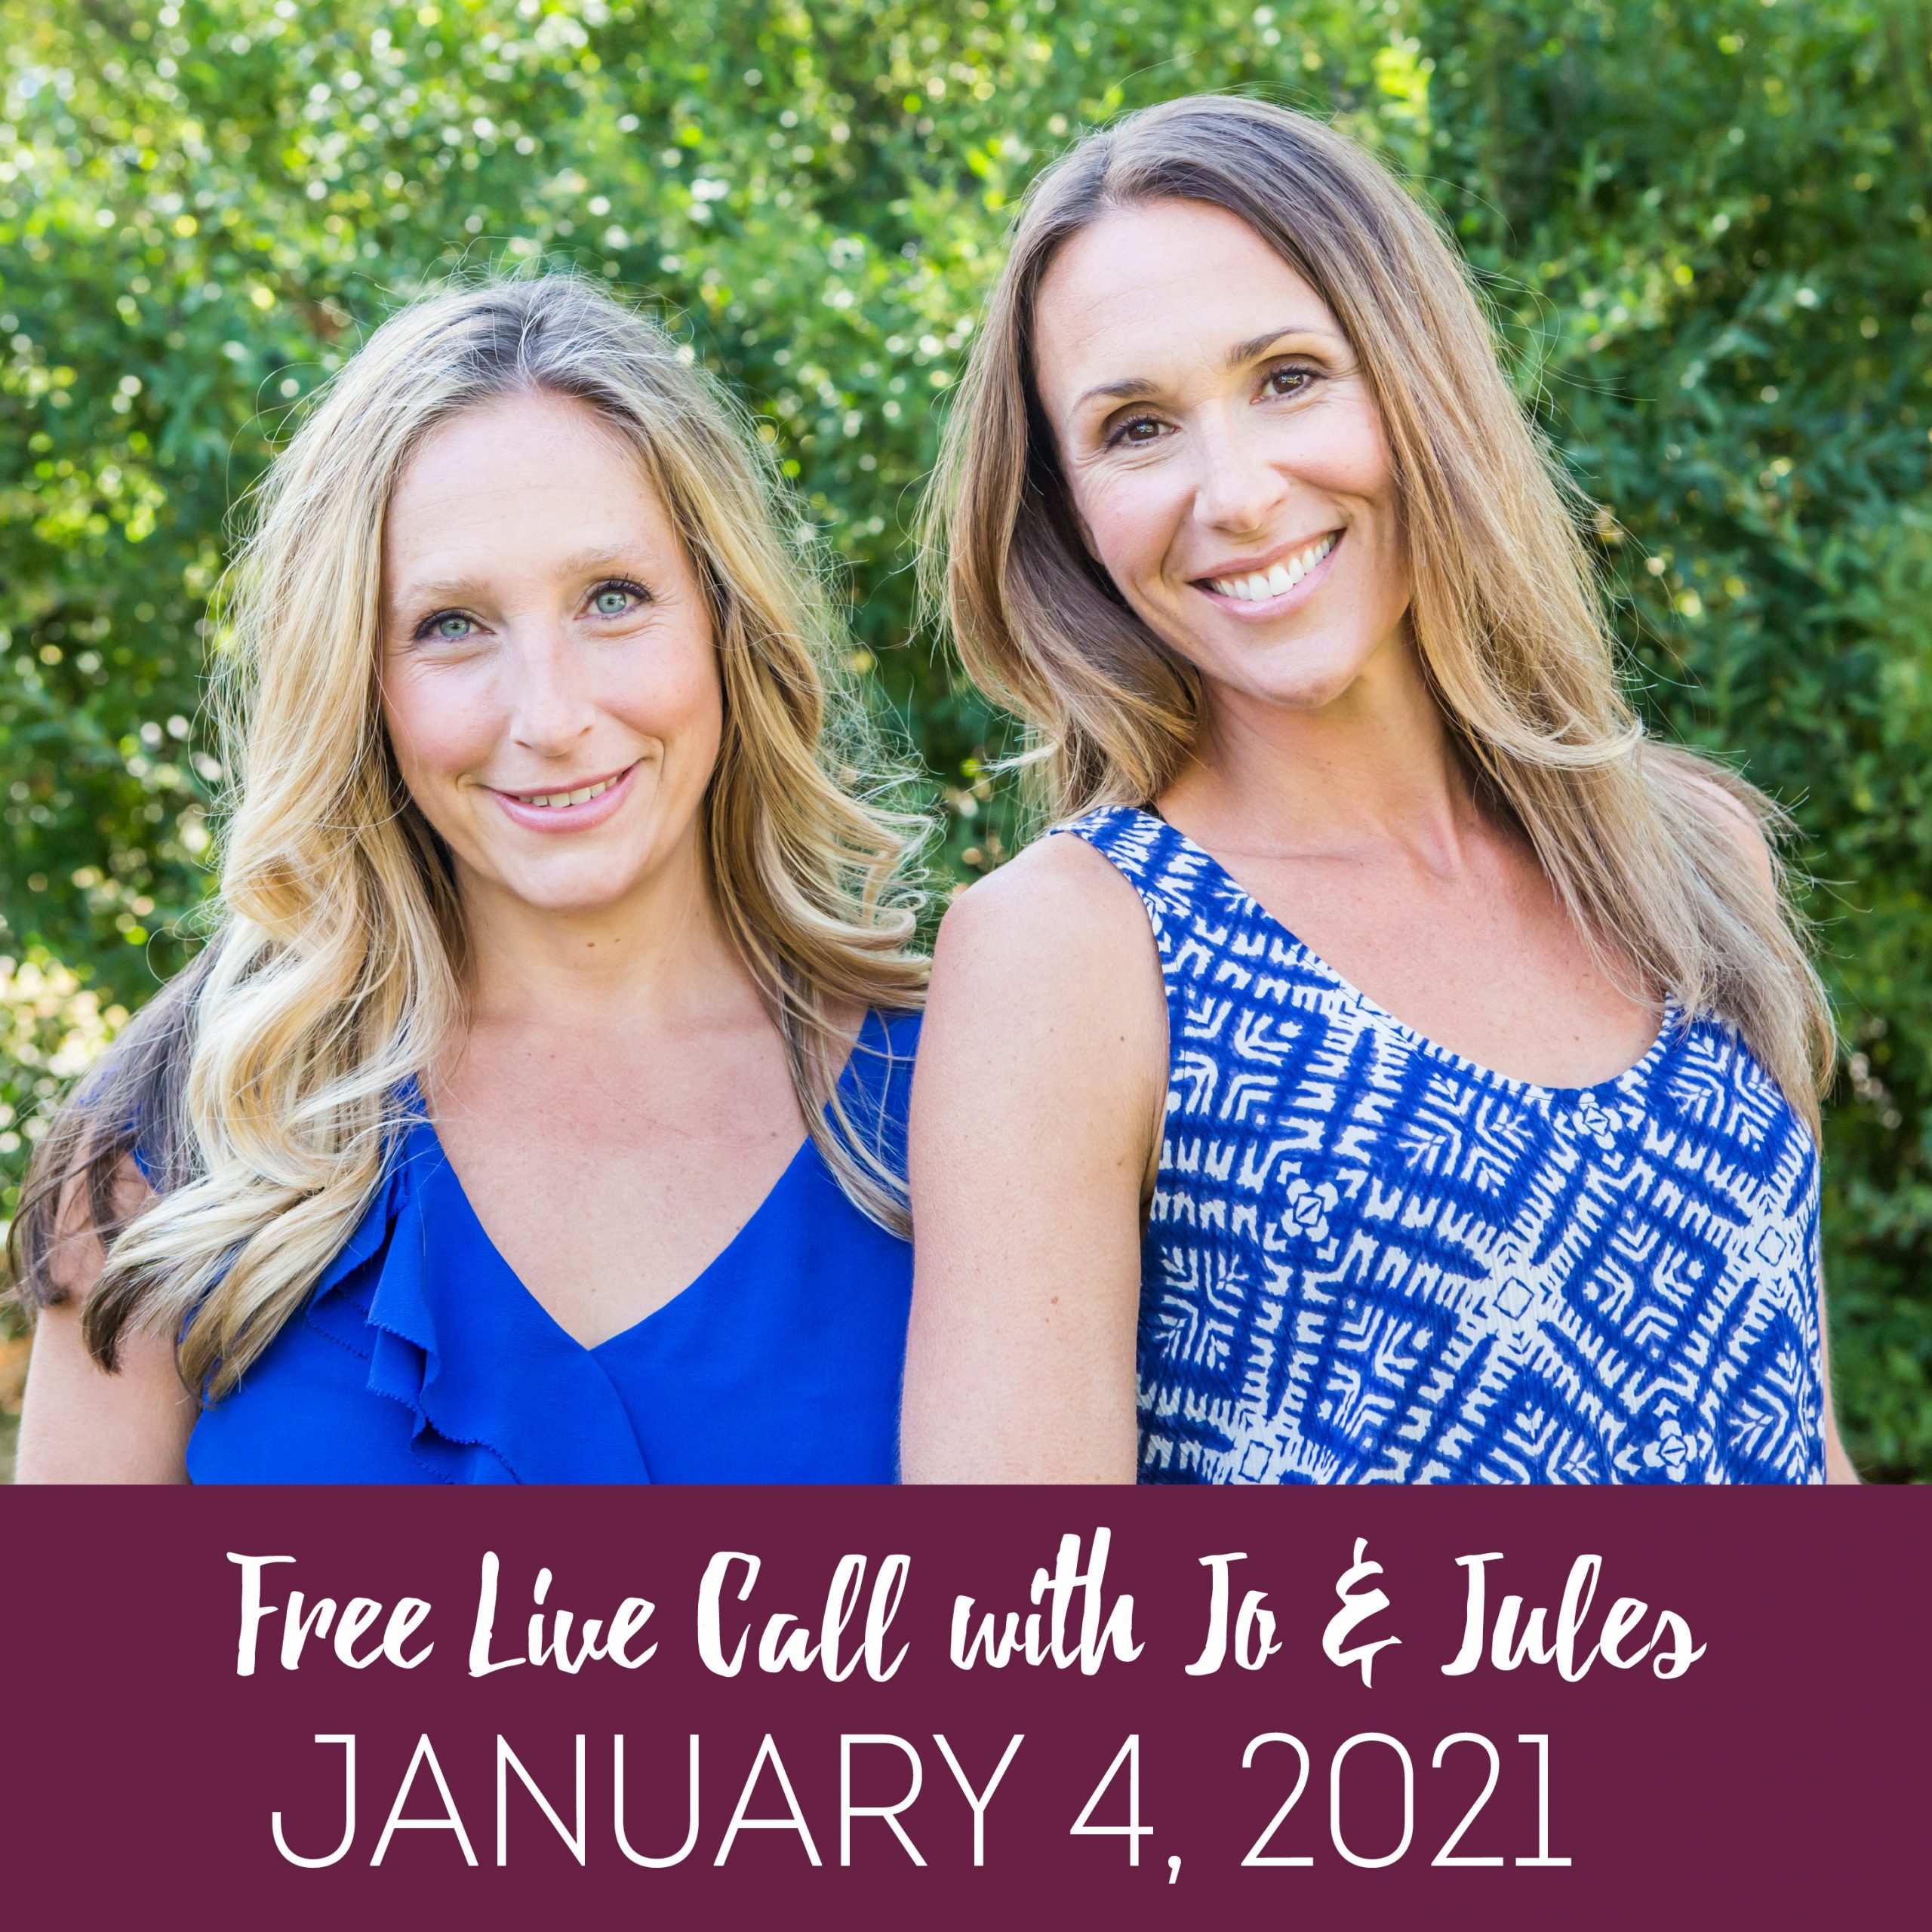 Jo and Jules - Free Live Call with Jo & Jules January 4,2021